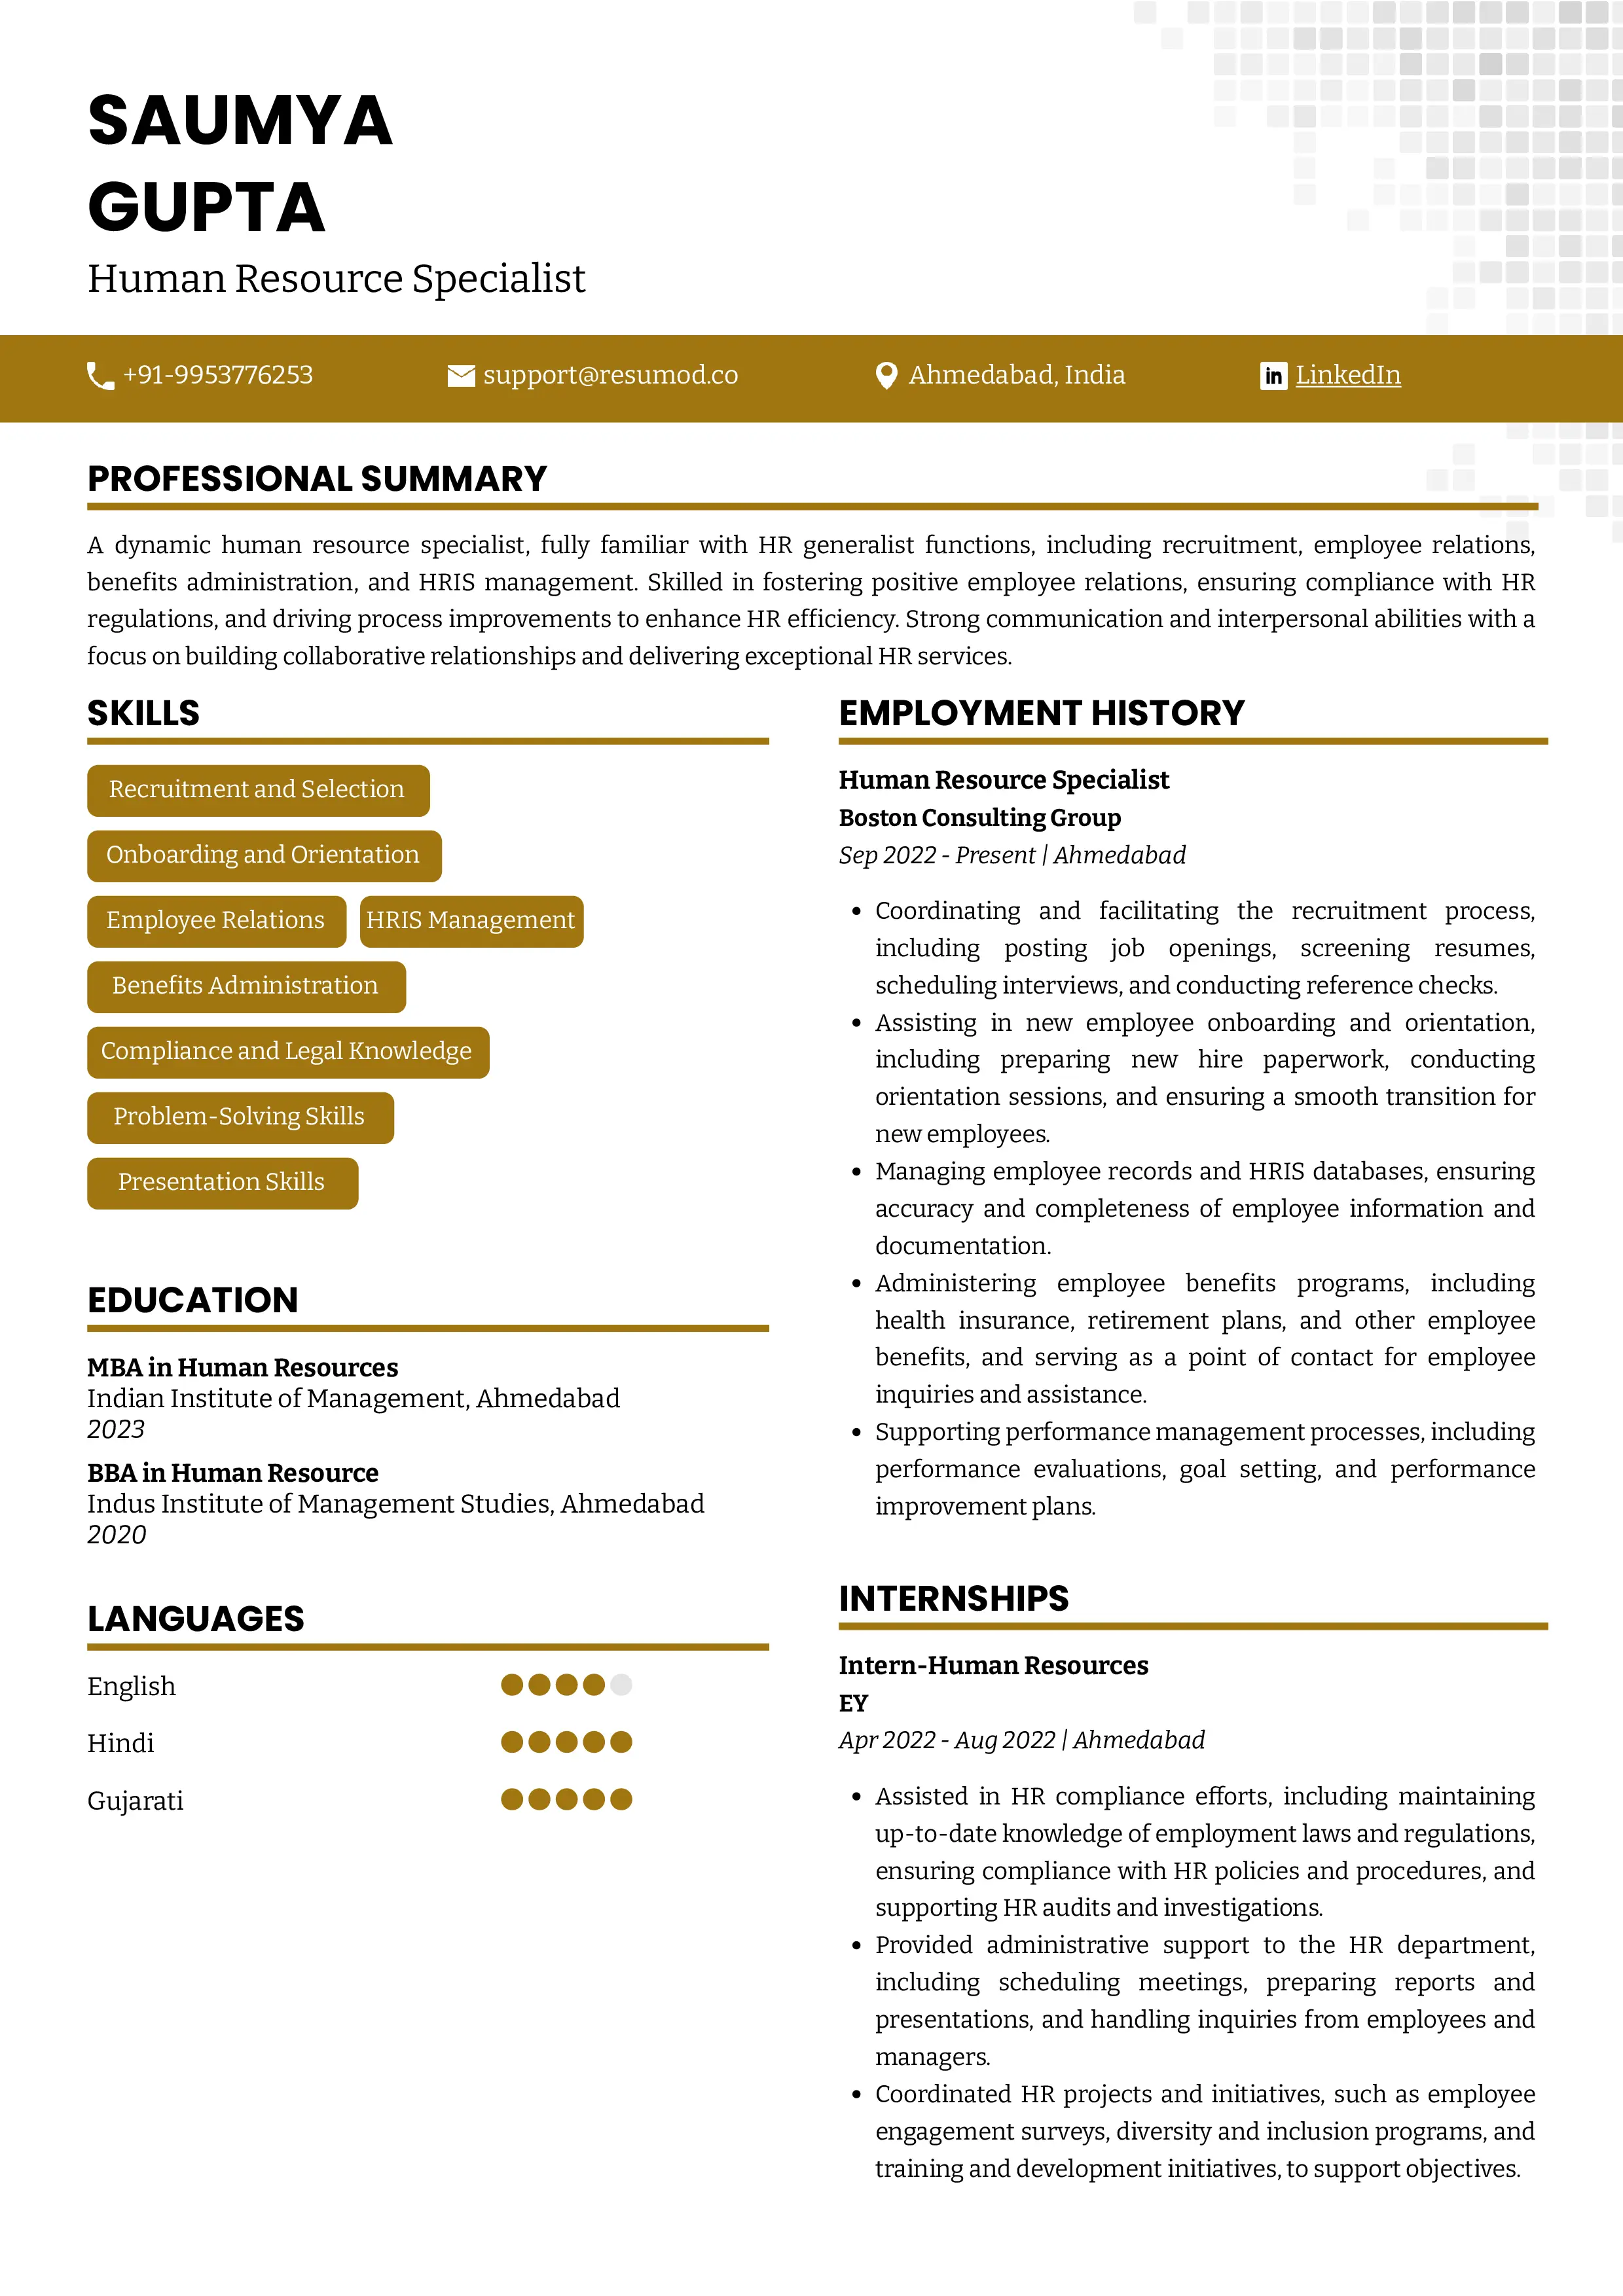 Sample Resume of Human Resource Specialist | Free Resume Templates & Samples on Resumod.co